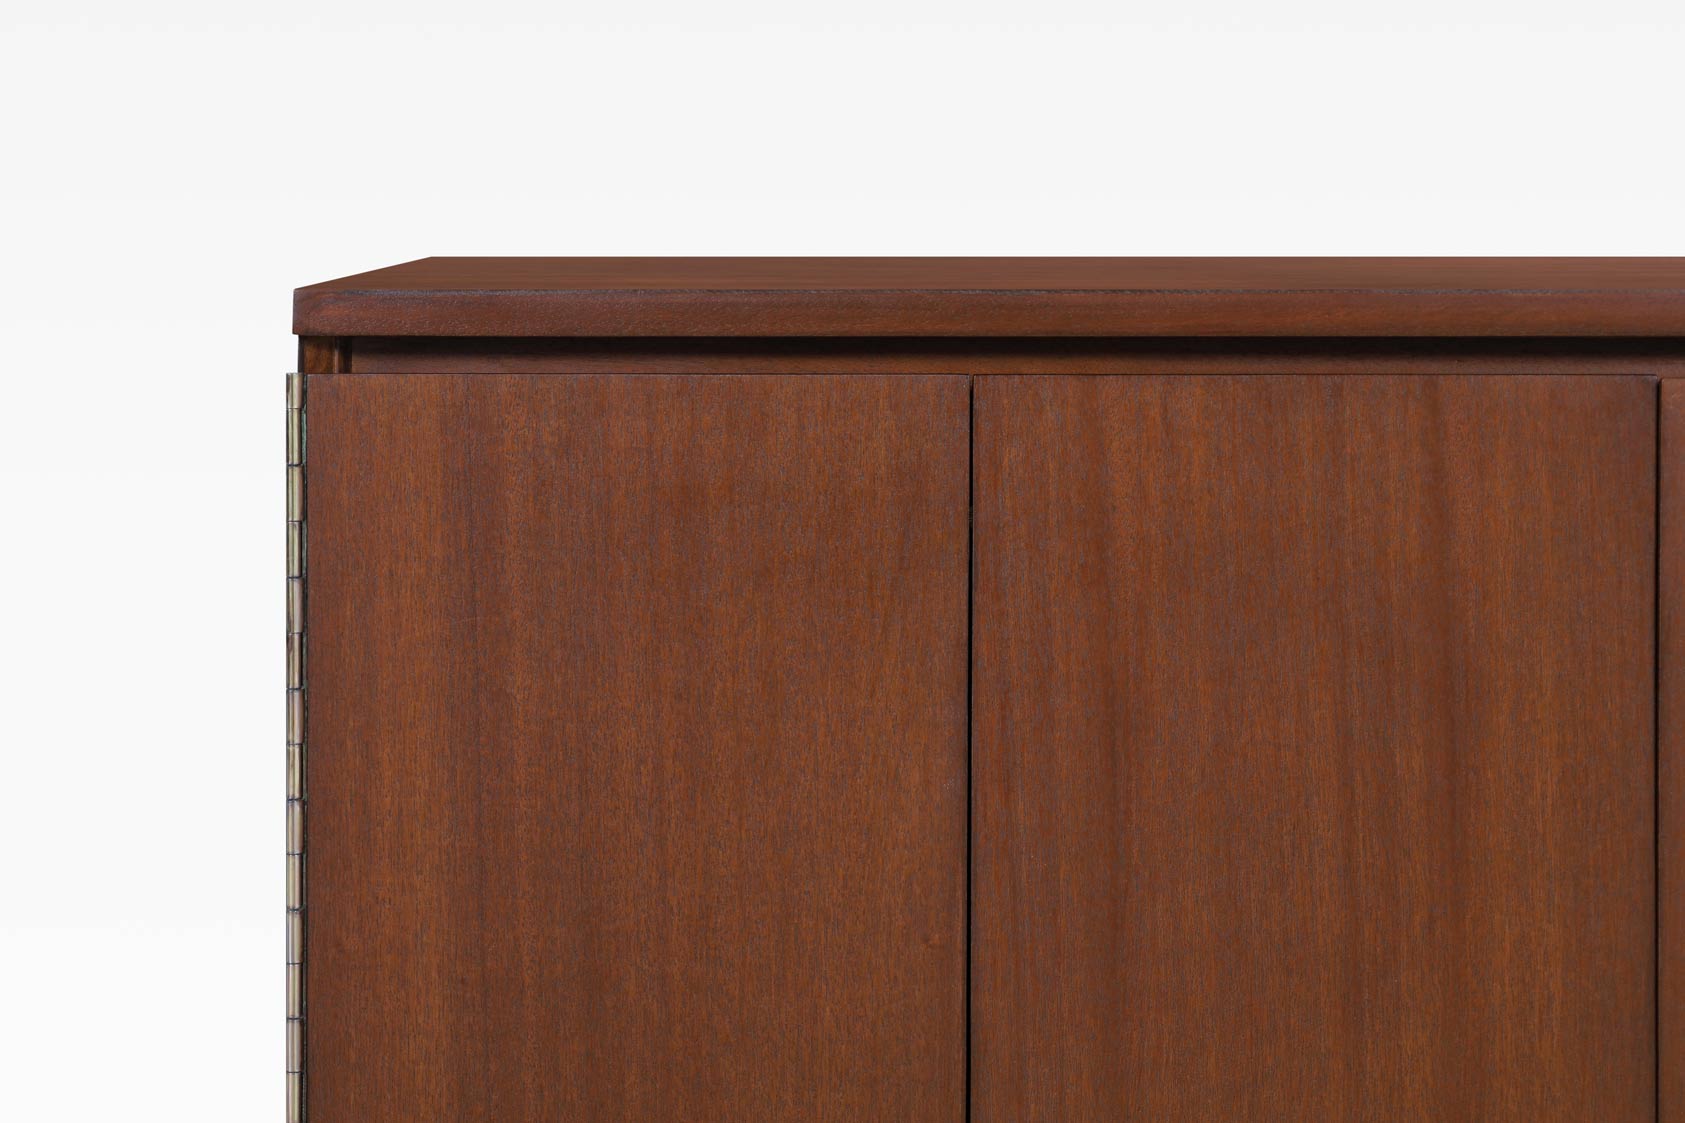 Vintage Irwin Collection Mahogany and Brass Credenza by Paul McCobb